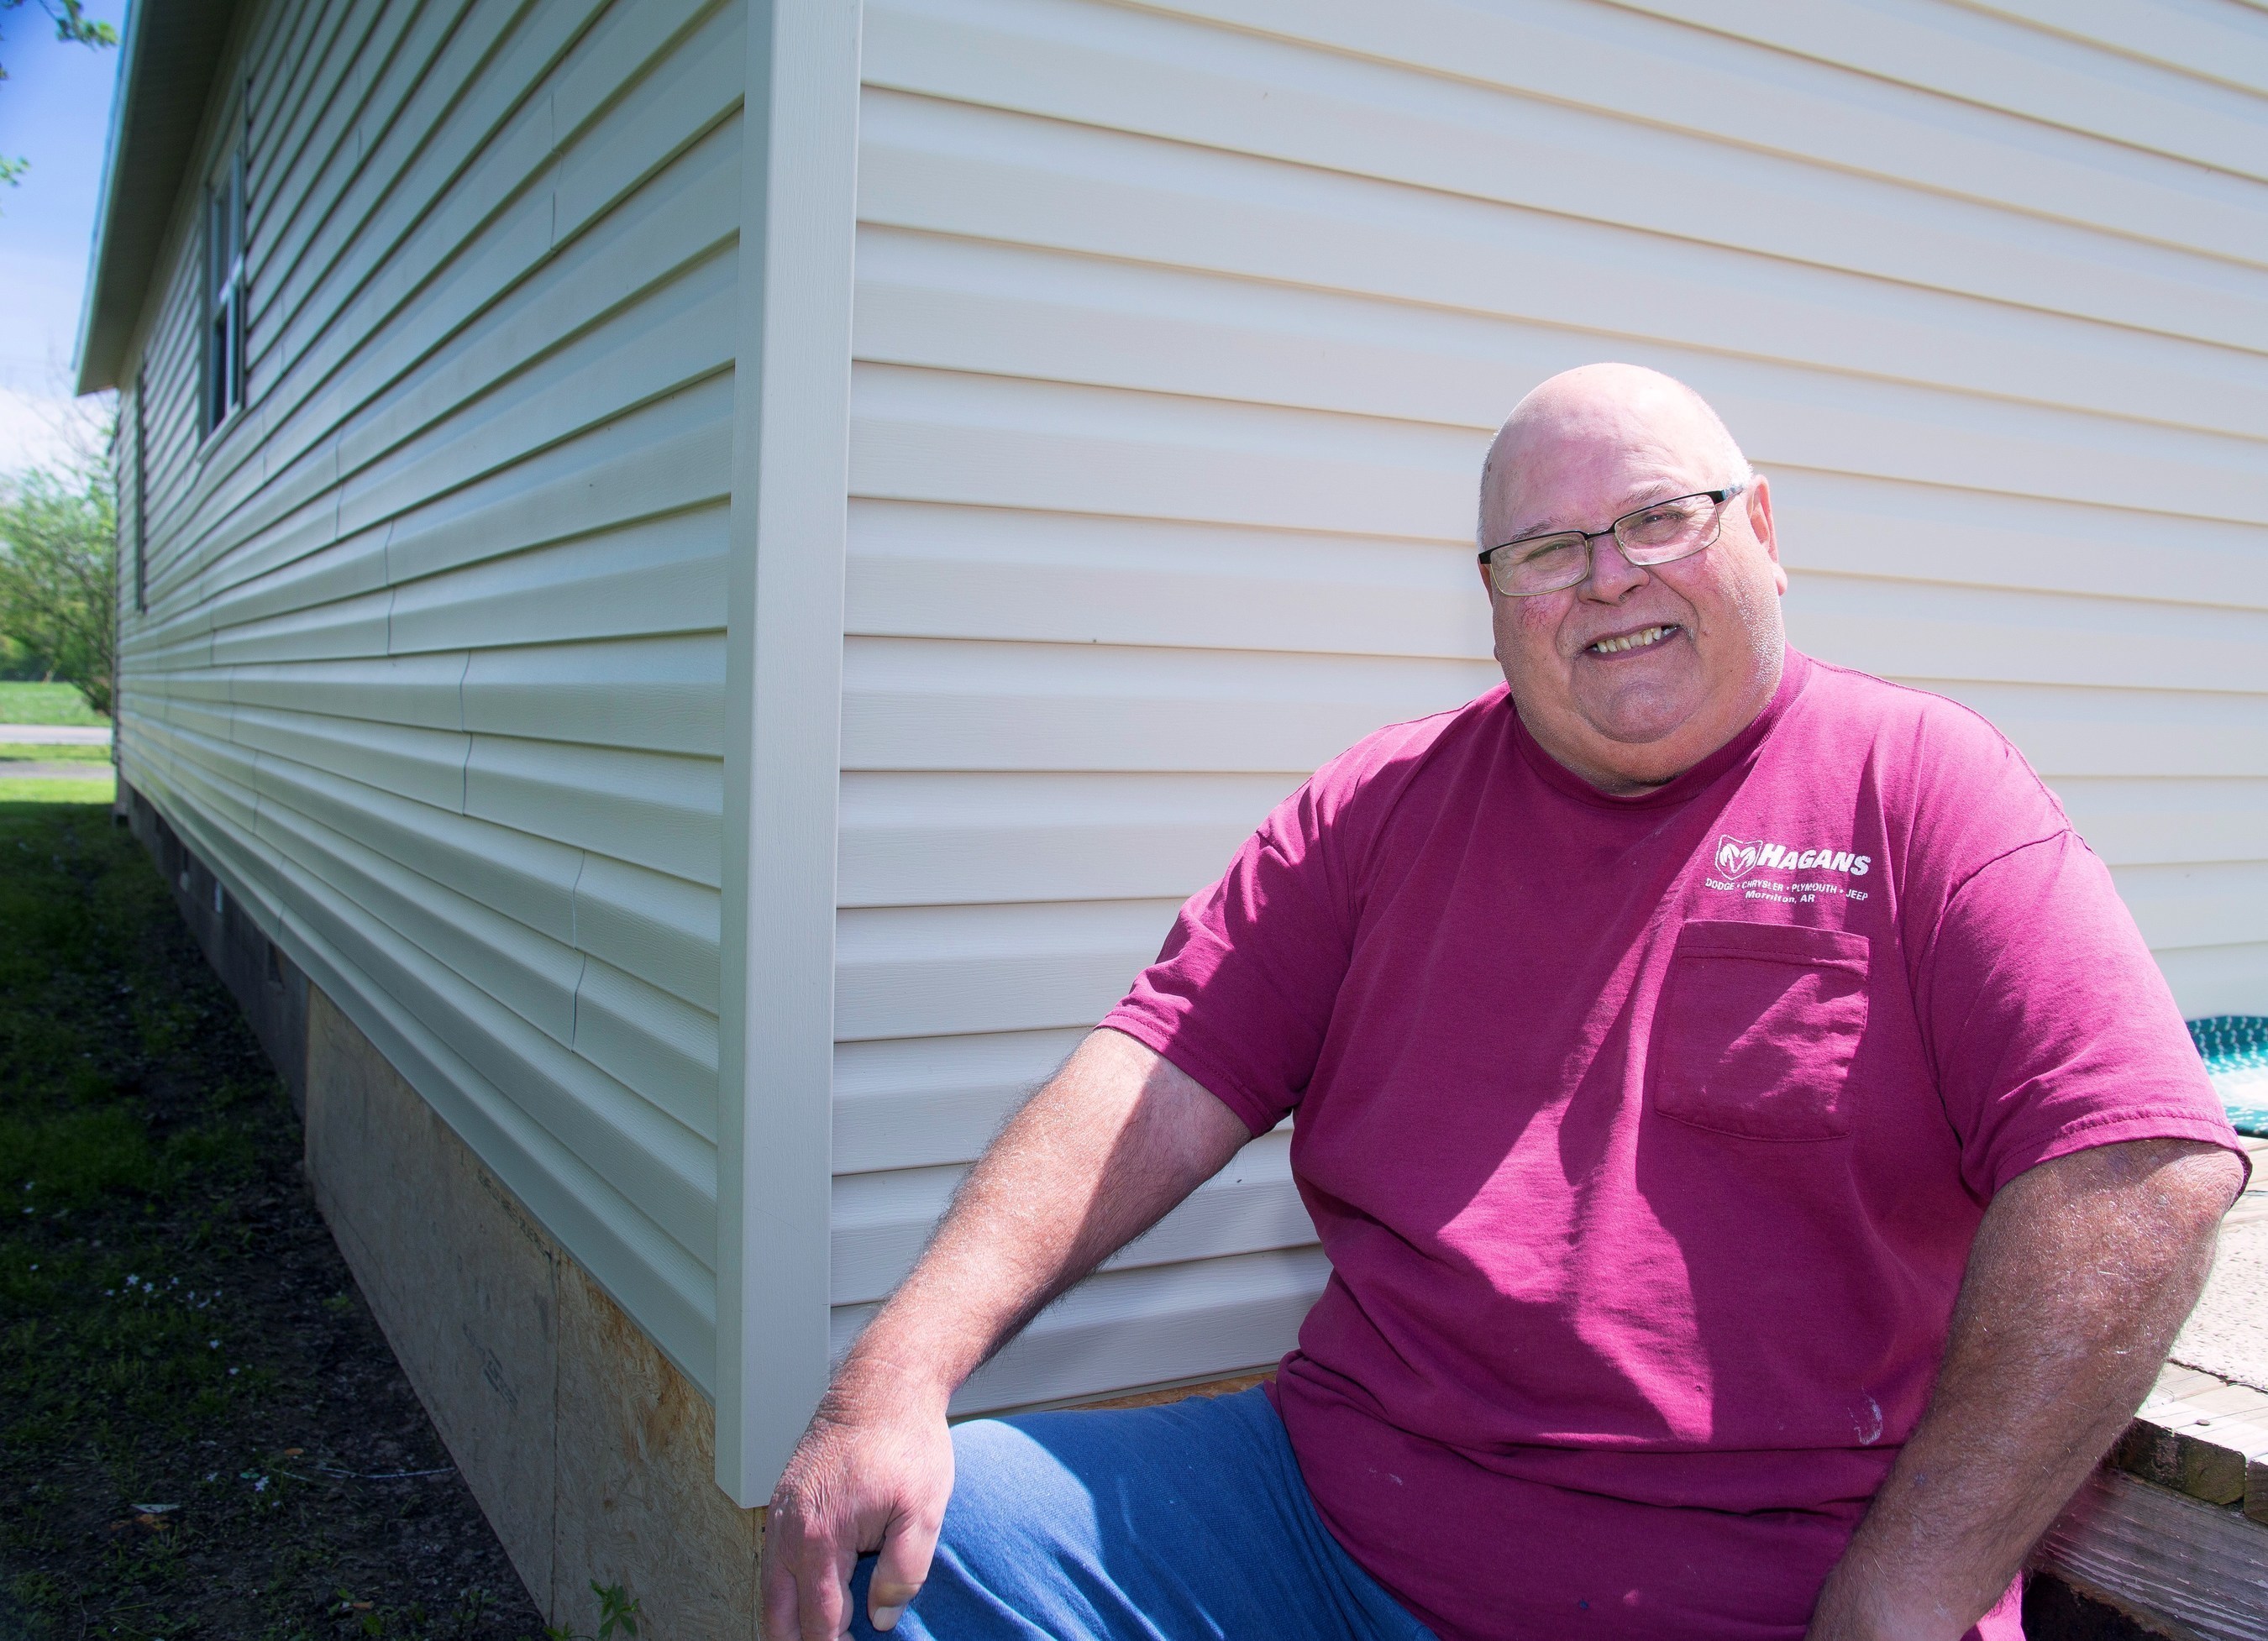 Kenneth Hinkston's home in Atkins, Arkansas received a new roof and new siding with the help of a Special Needs Assistance Program (SNAP) grant from River Town Bank and the Federal Home Loan Bank of Dallas. For information about SNAP grants, contact River Town Bank.